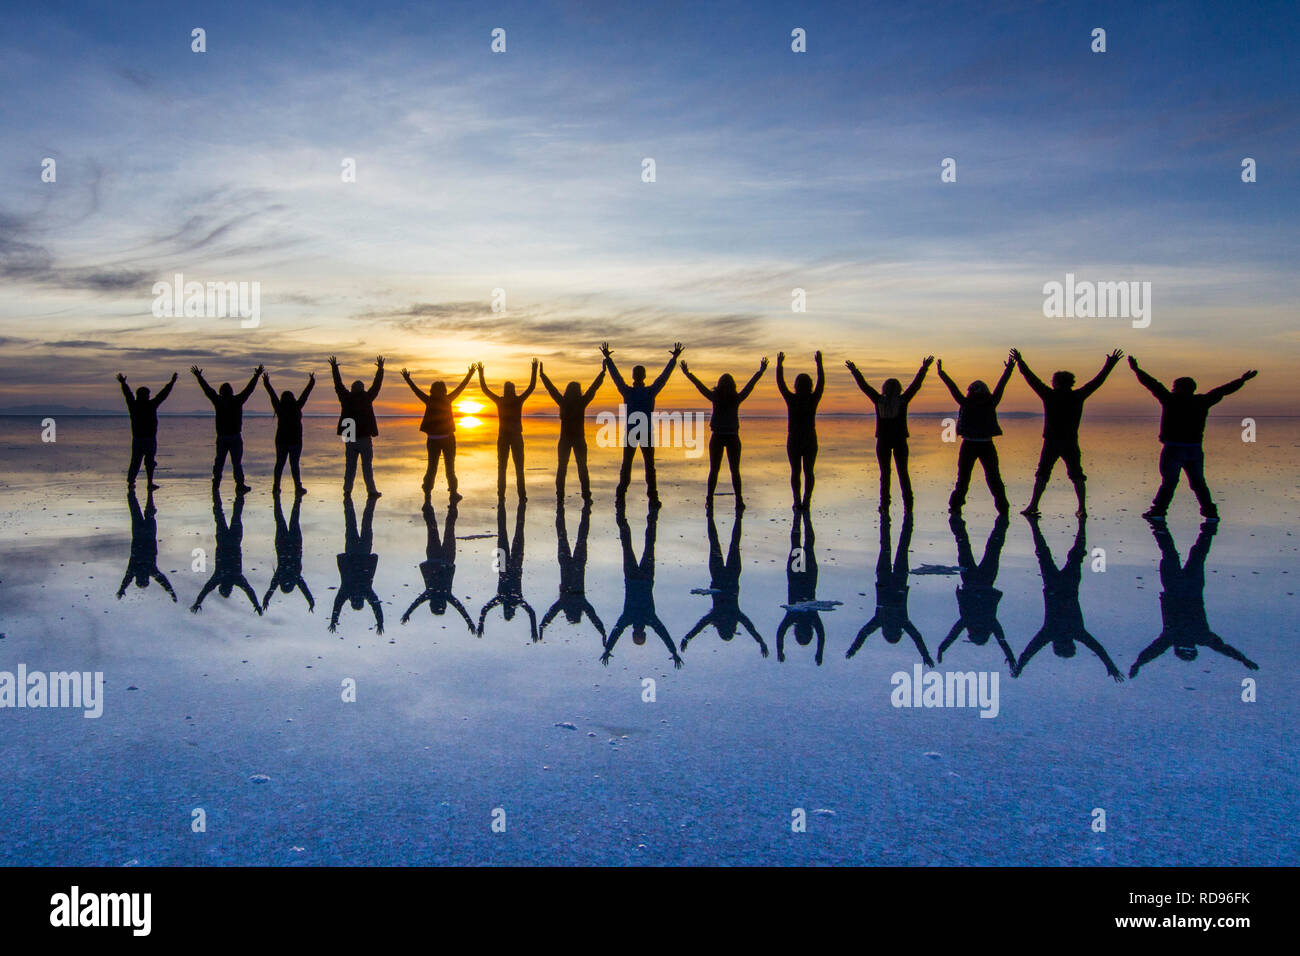 Amazing real people reflections in water at Uyuni Saltflats scenery. People playing with the reflections over the salt lake during a colorful sunrise Stock Photo